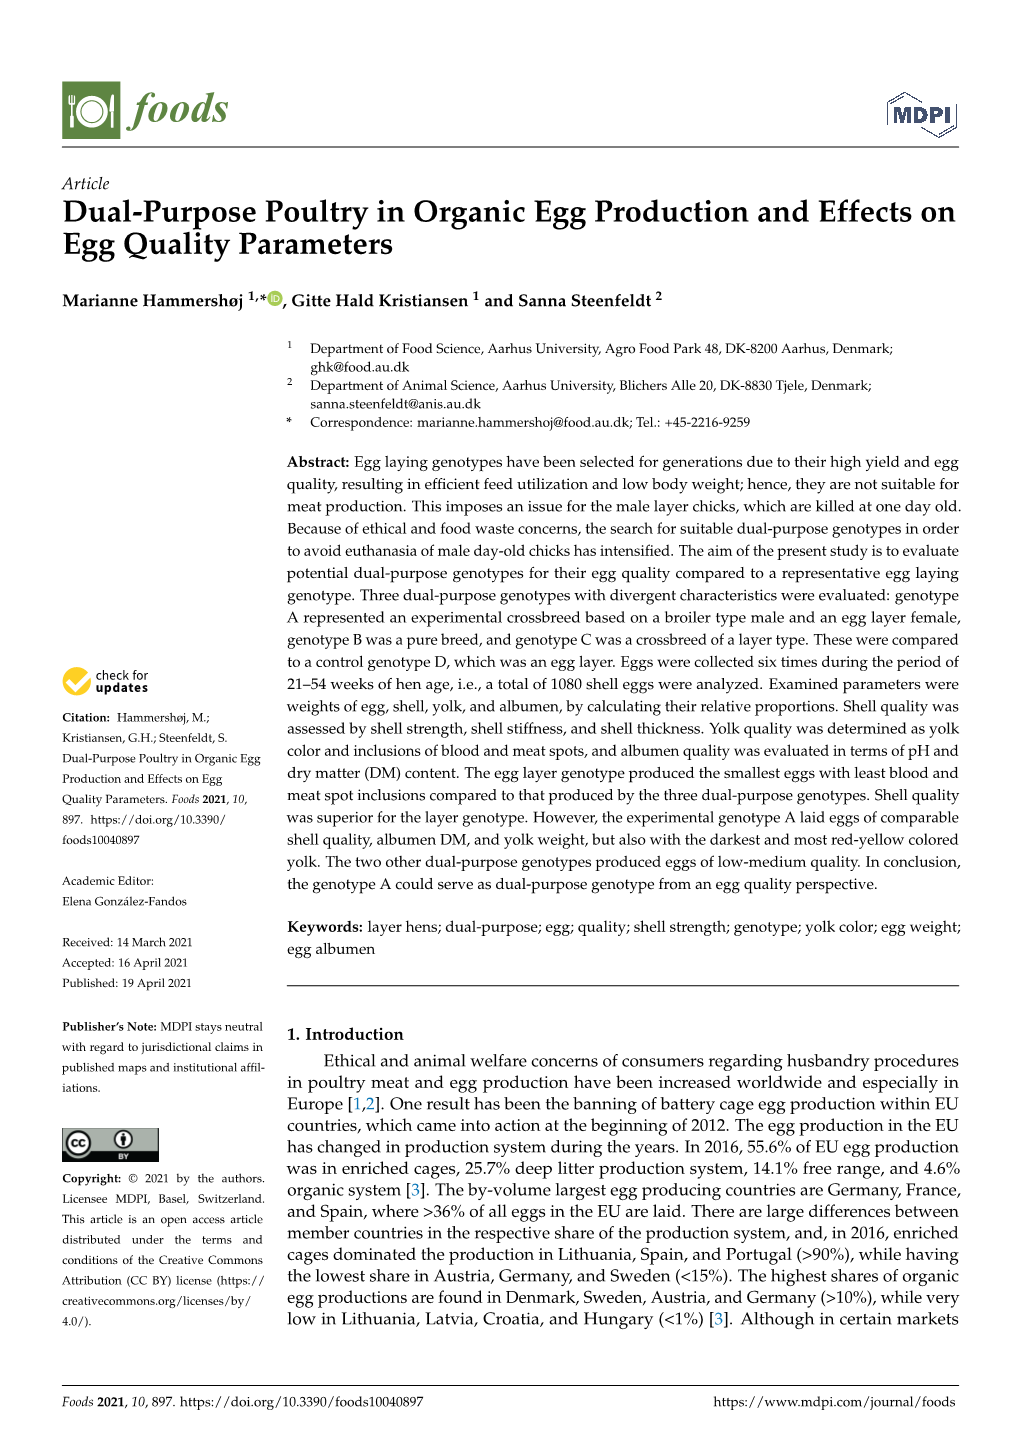 Dual-Purpose Poultry in Organic Egg Production and Effects on Egg Quality Parameters